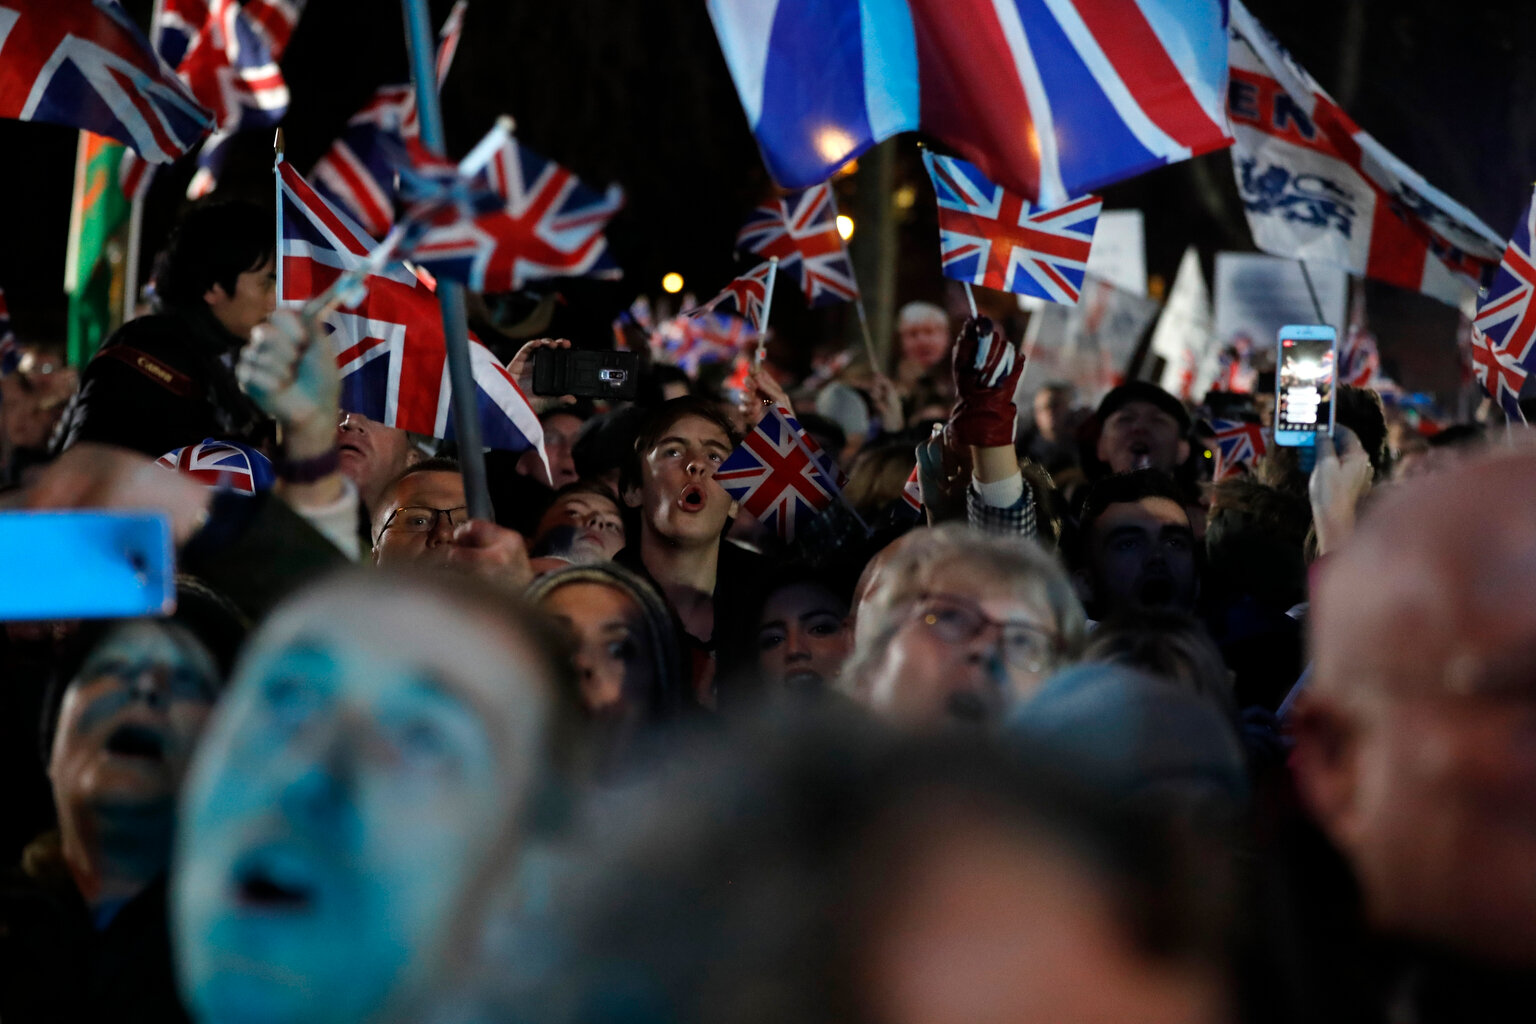  Brexit supporters celebrate during a rally in London, Friday, Jan. 31, 2020. Britain leaves the European Union after 47 years, leaping into an unknown future in historic blow to the bloc. (AP Photo/Frank Augstein) 